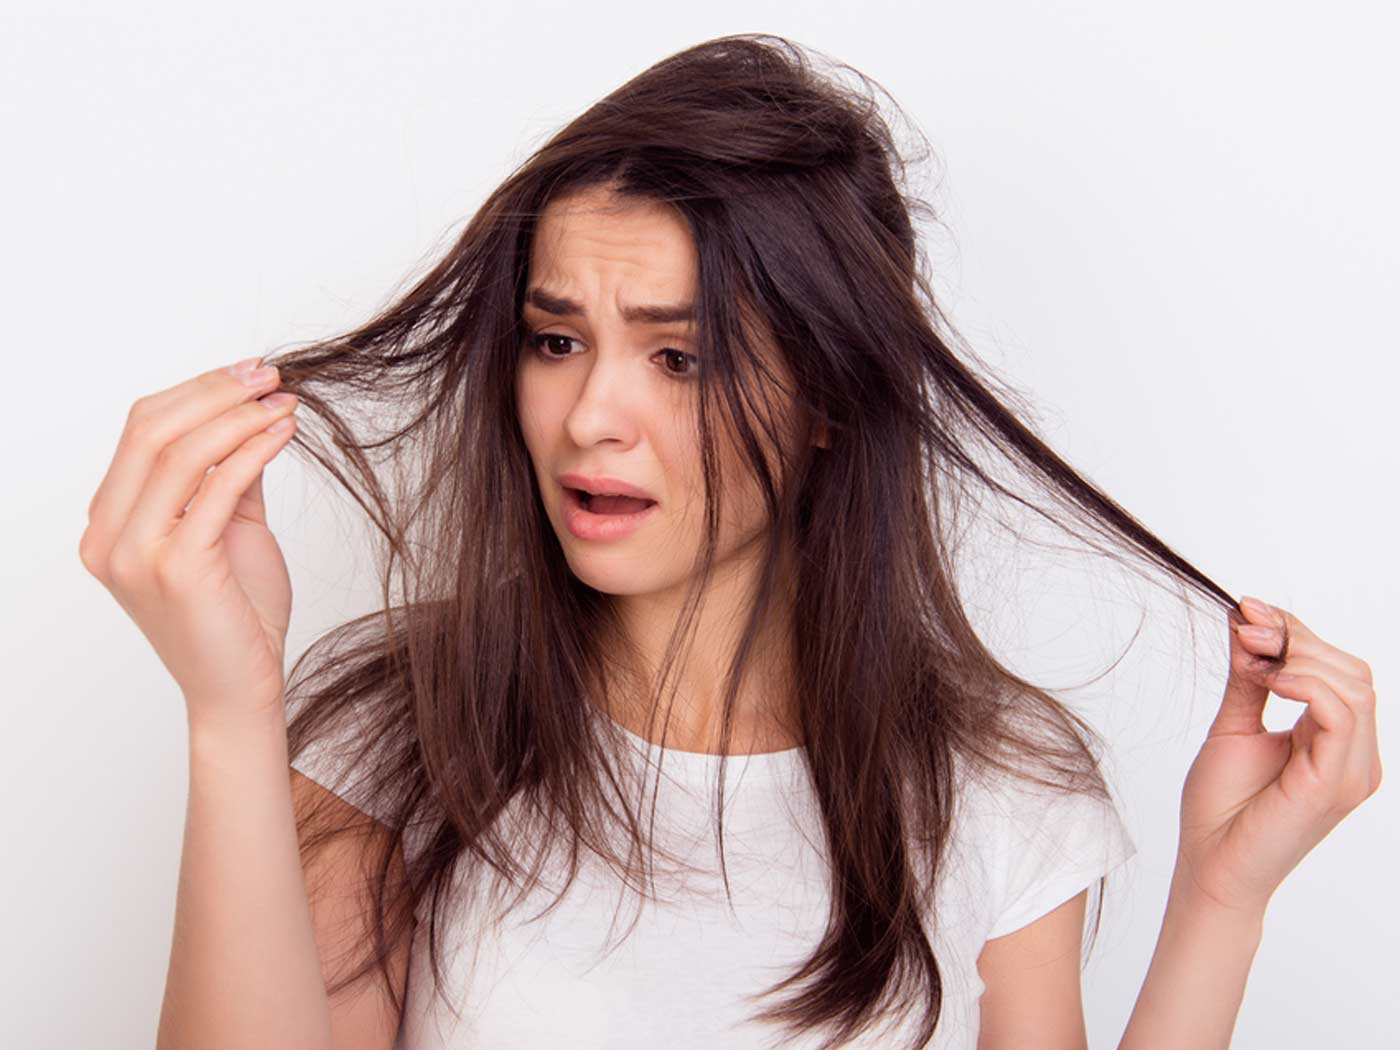 How to treat damaged hair